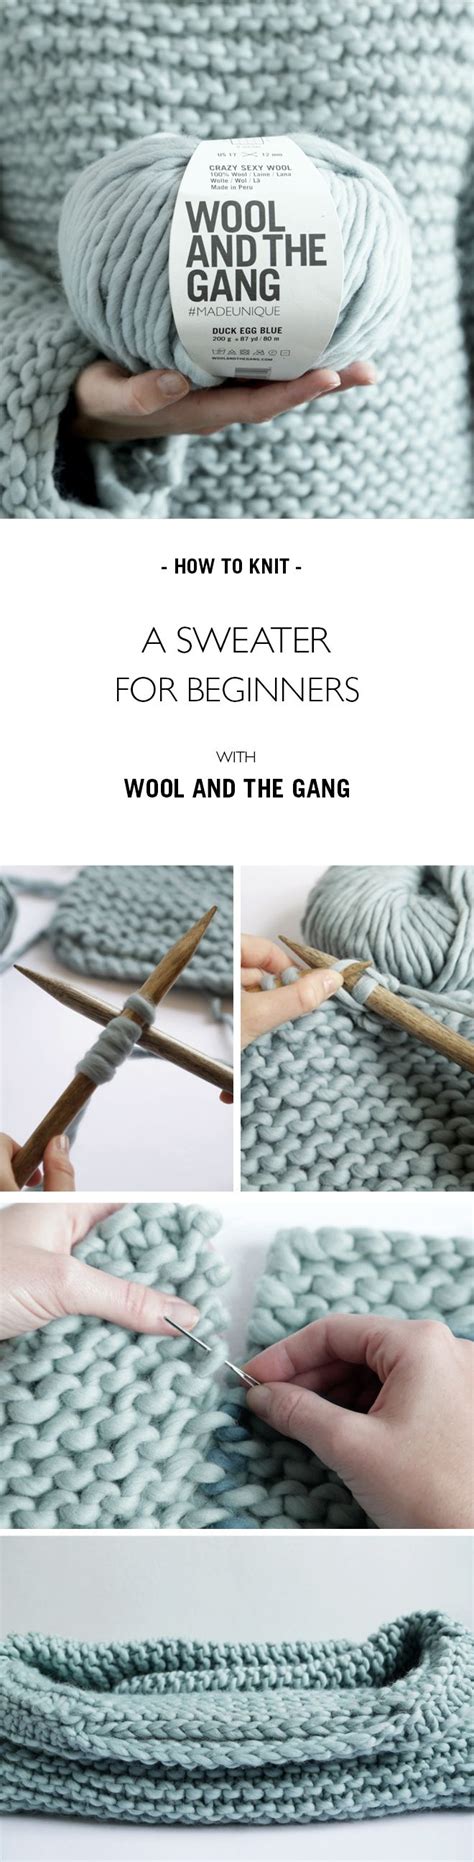 How To Knit The Sweater For Beginners With Wool And The Gang